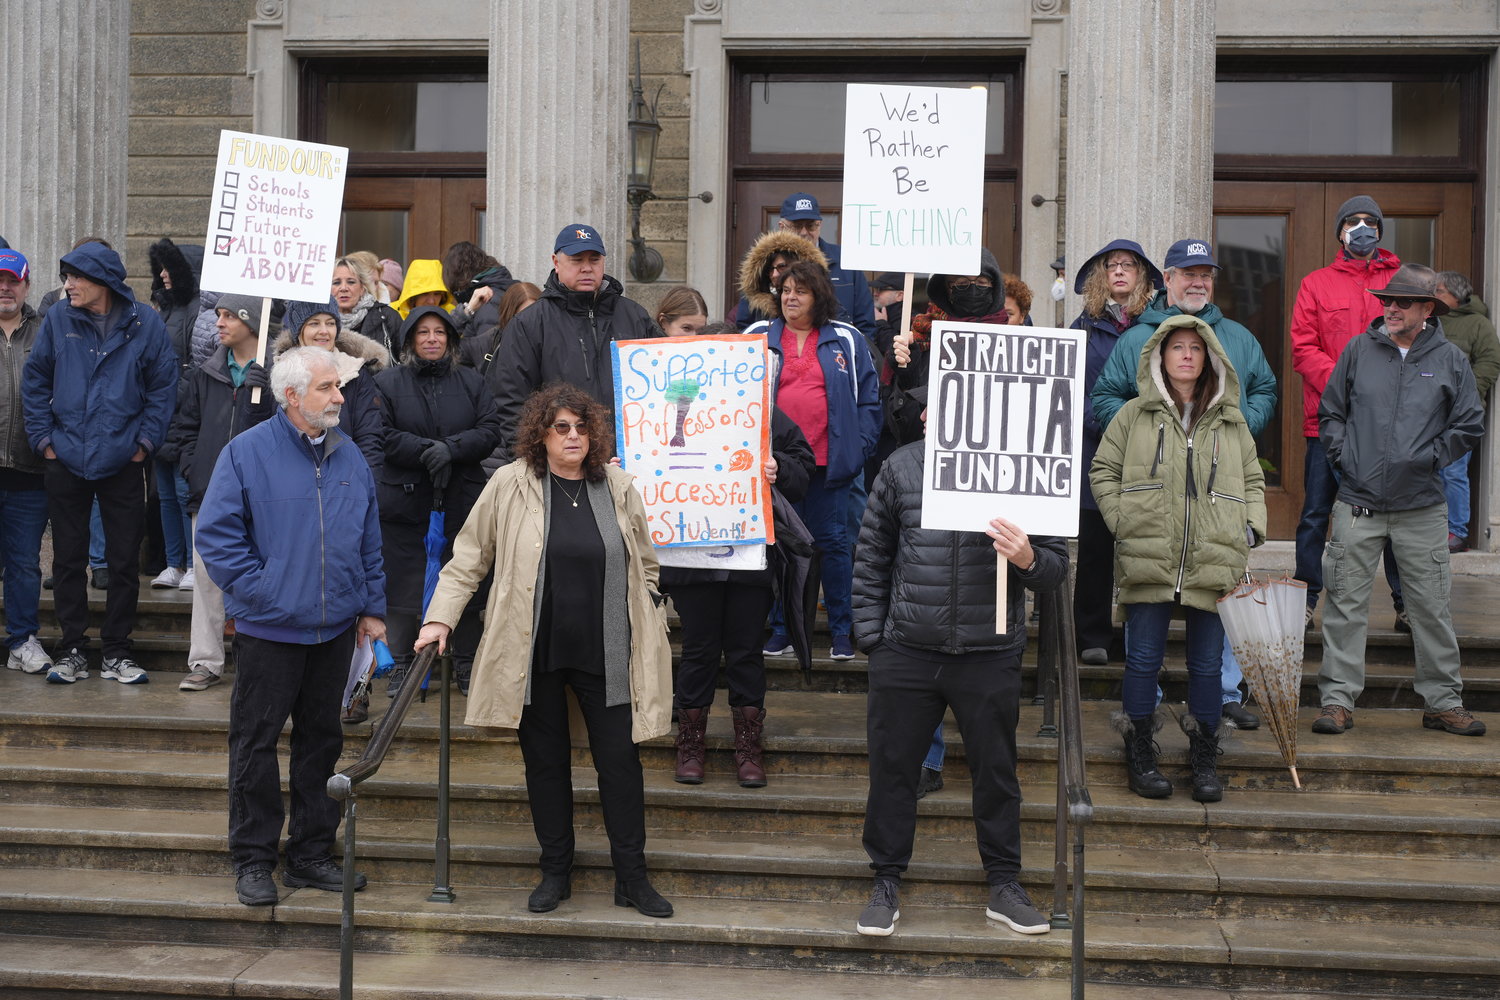 Members of the Nassau Community College Federation of Teachers, an educators union supporting the school’s full-time faculty, gathered at the Nassau County Legislature to demand fair contracts after learning their health care insurance premiums were going up.